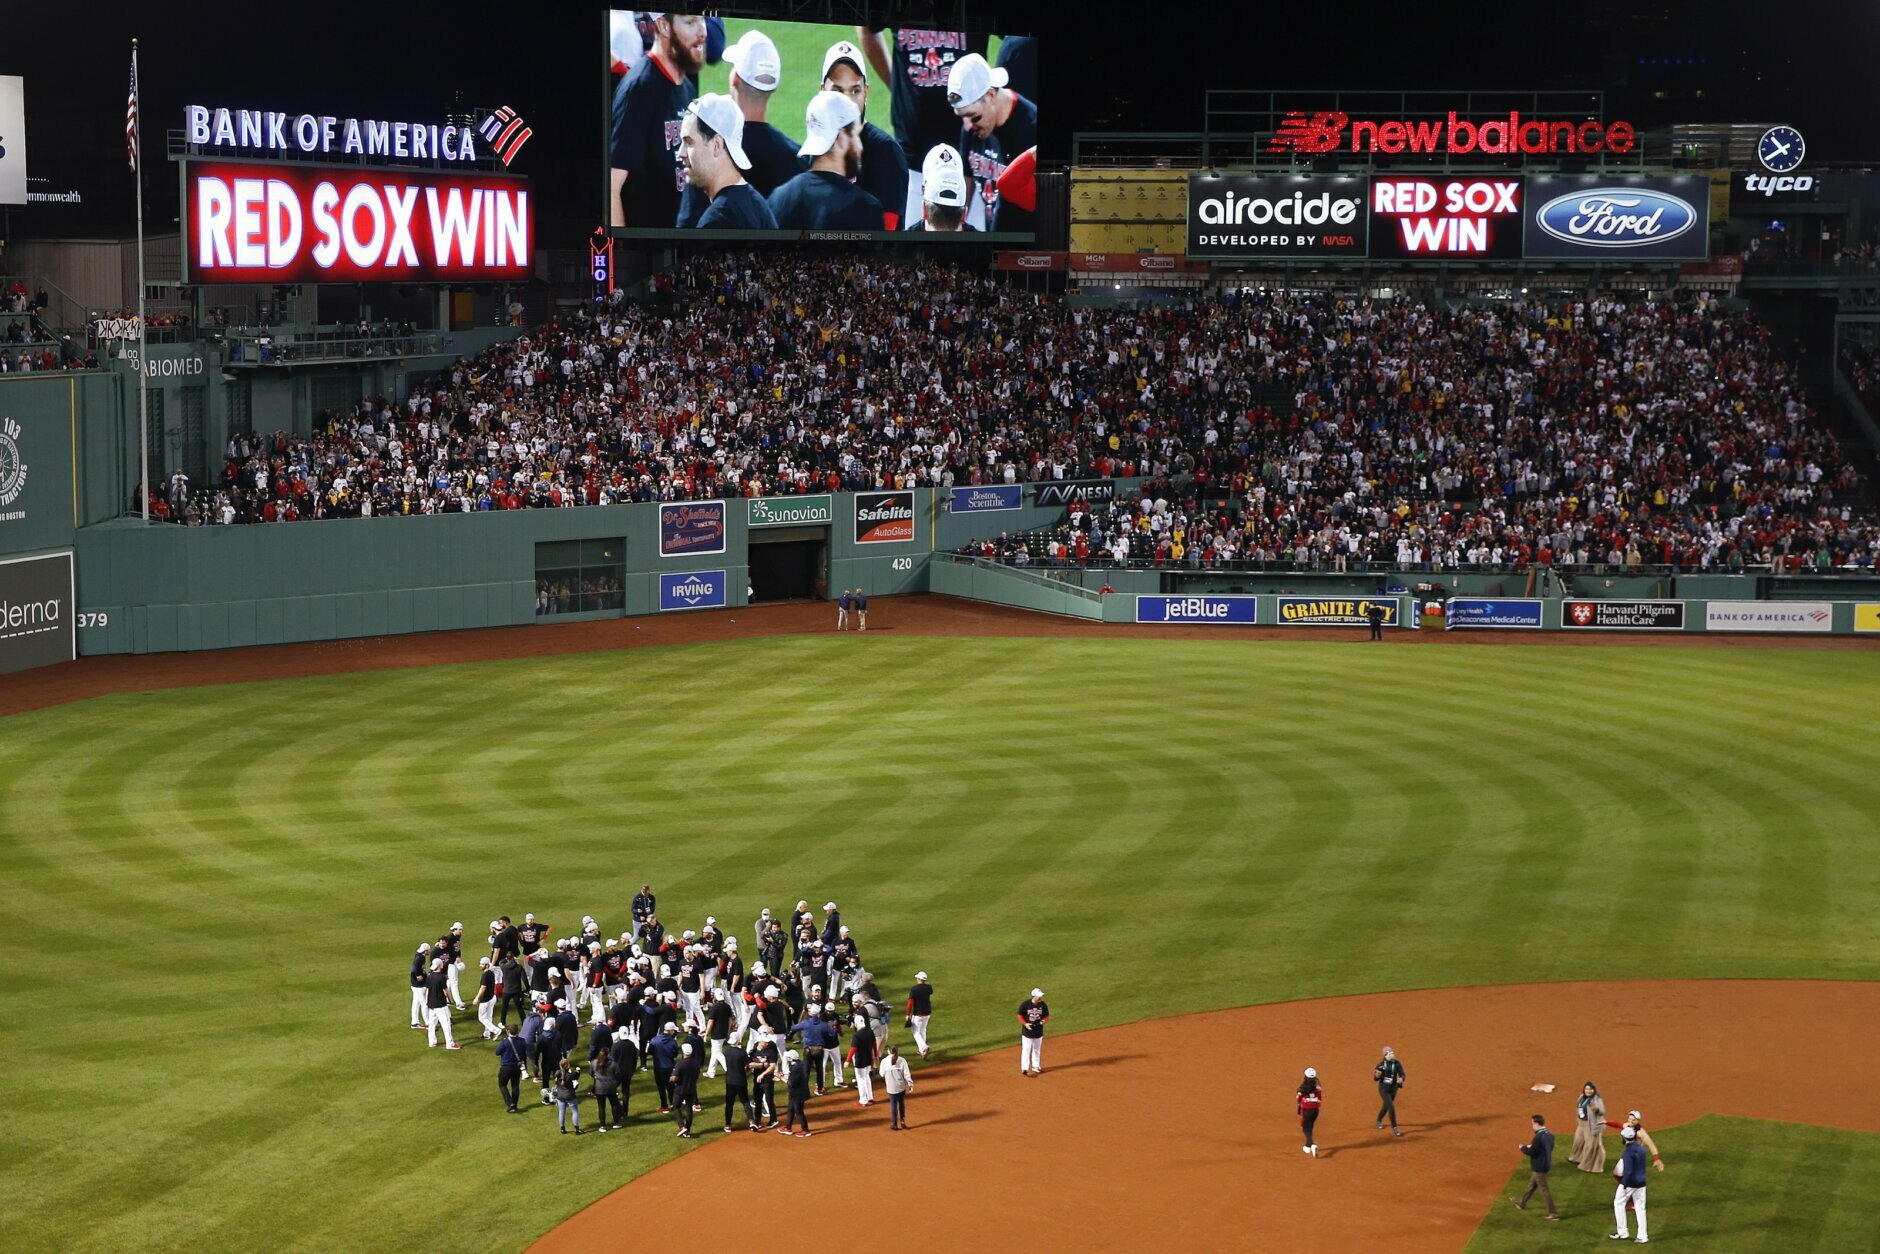 Red Sox walk off for second straight night, eliminate Rays to reach ALCS